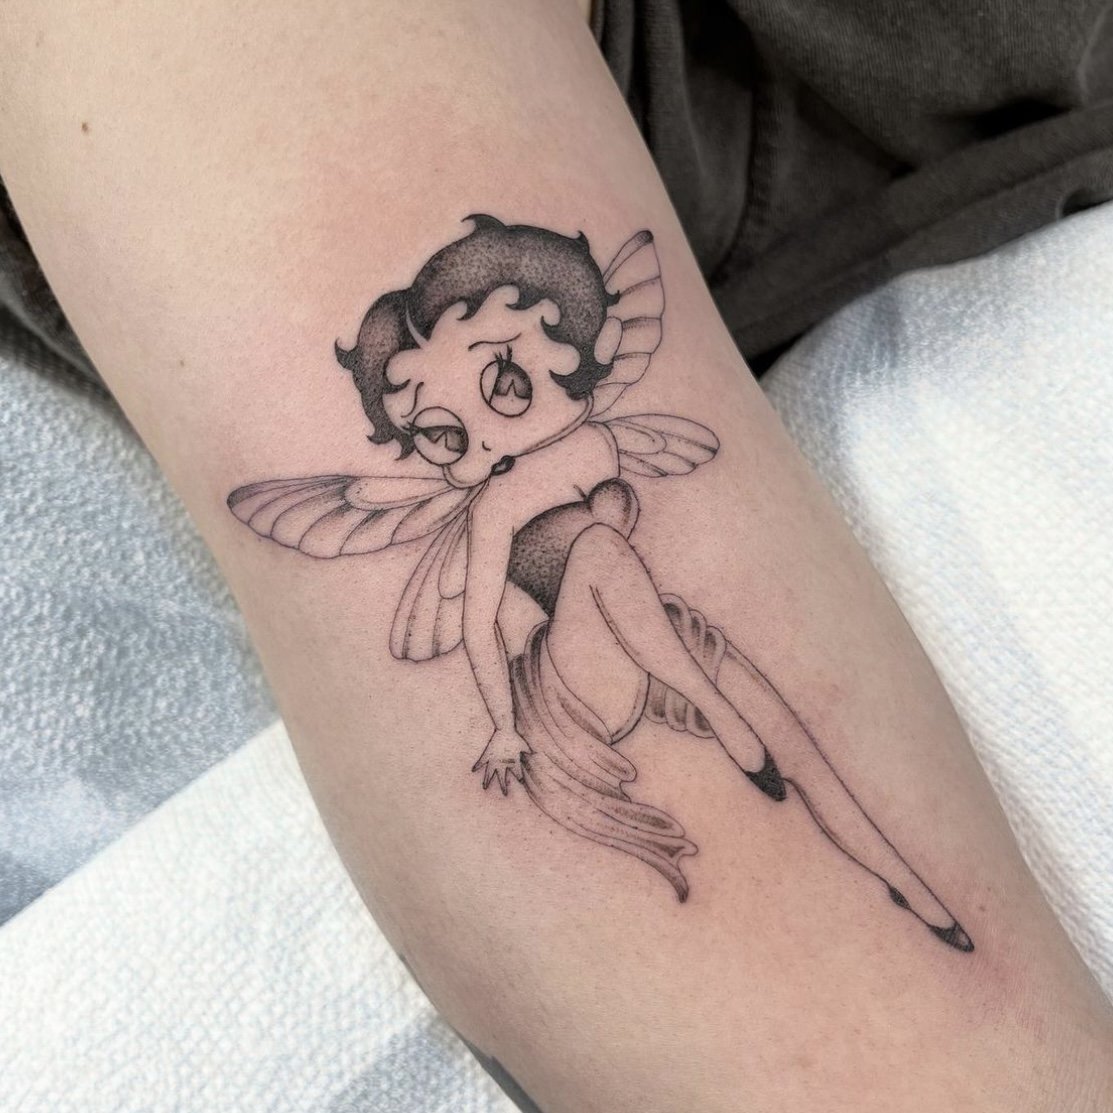 Betty Boop tattoo done on the upper arm